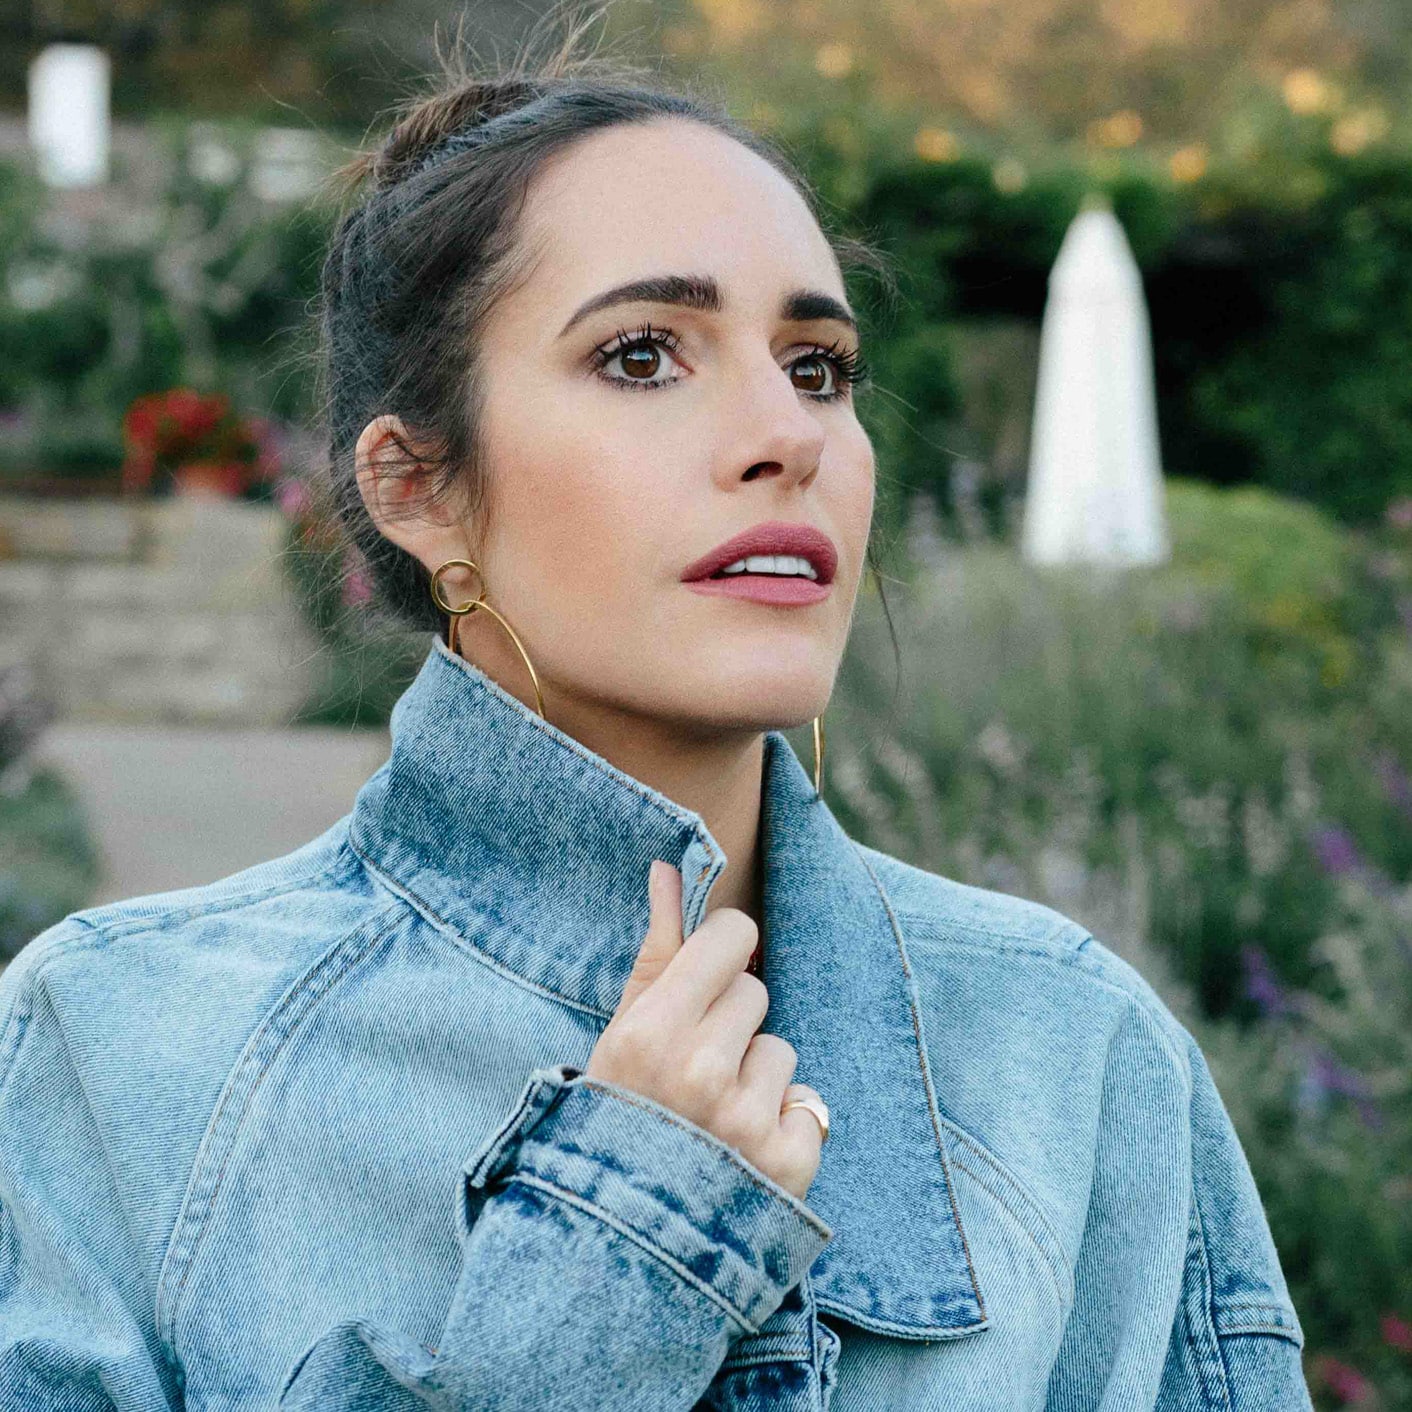 Louise Roe wearing drugstore beauty products and a denim jacket in Santa Barbara